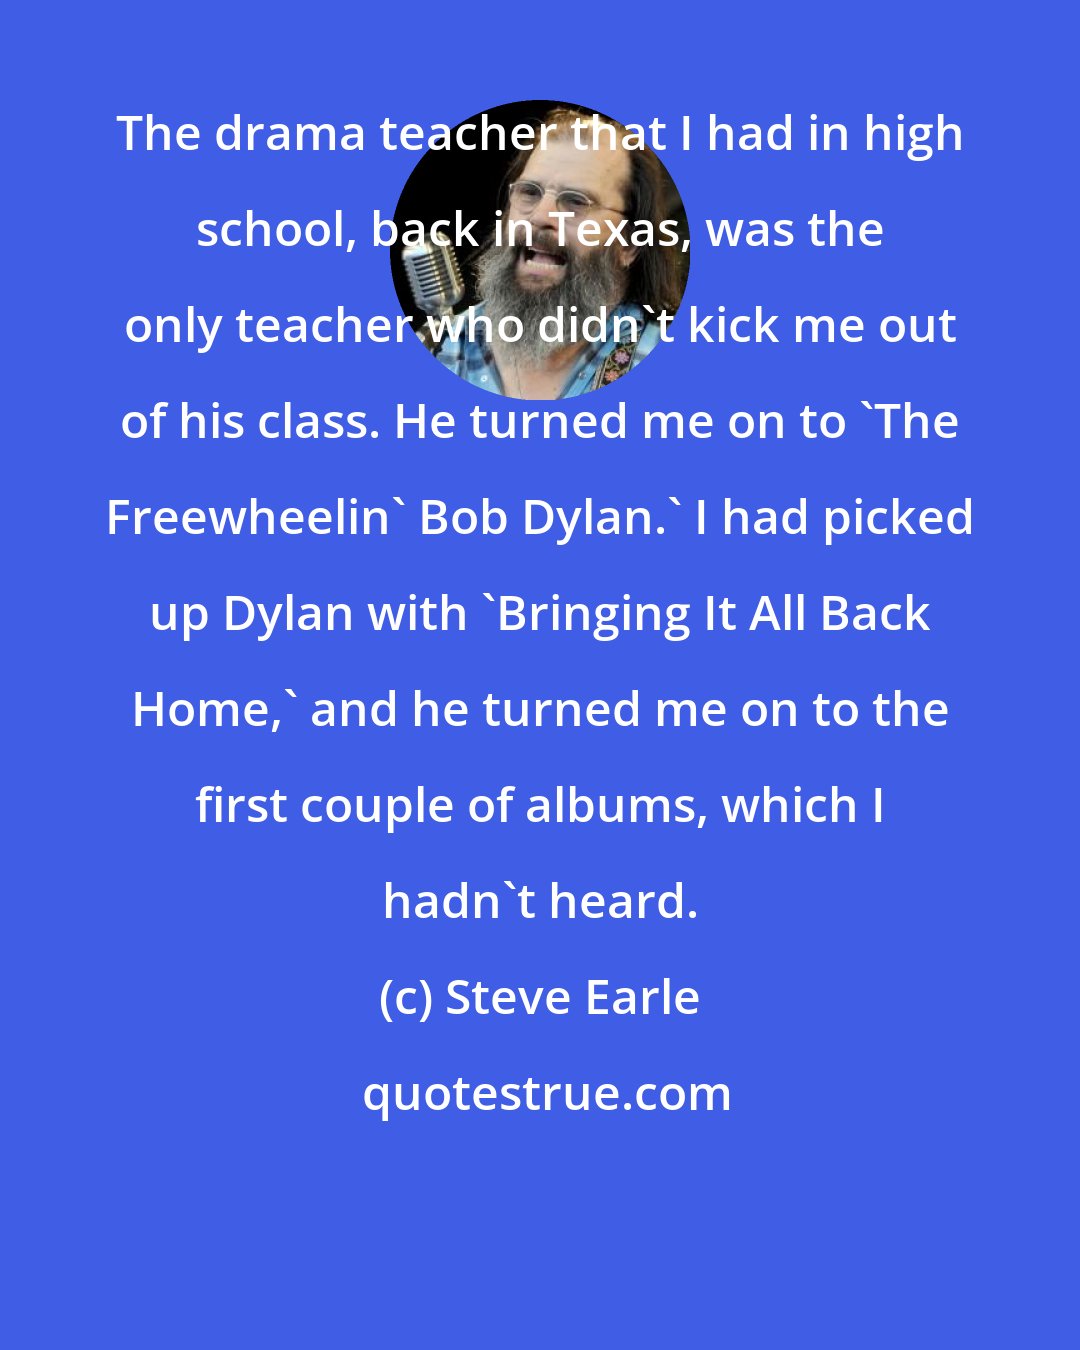 Steve Earle: The drama teacher that I had in high school, back in Texas, was the only teacher who didn't kick me out of his class. He turned me on to 'The Freewheelin' Bob Dylan.' I had picked up Dylan with 'Bringing It All Back Home,' and he turned me on to the first couple of albums, which I hadn't heard.